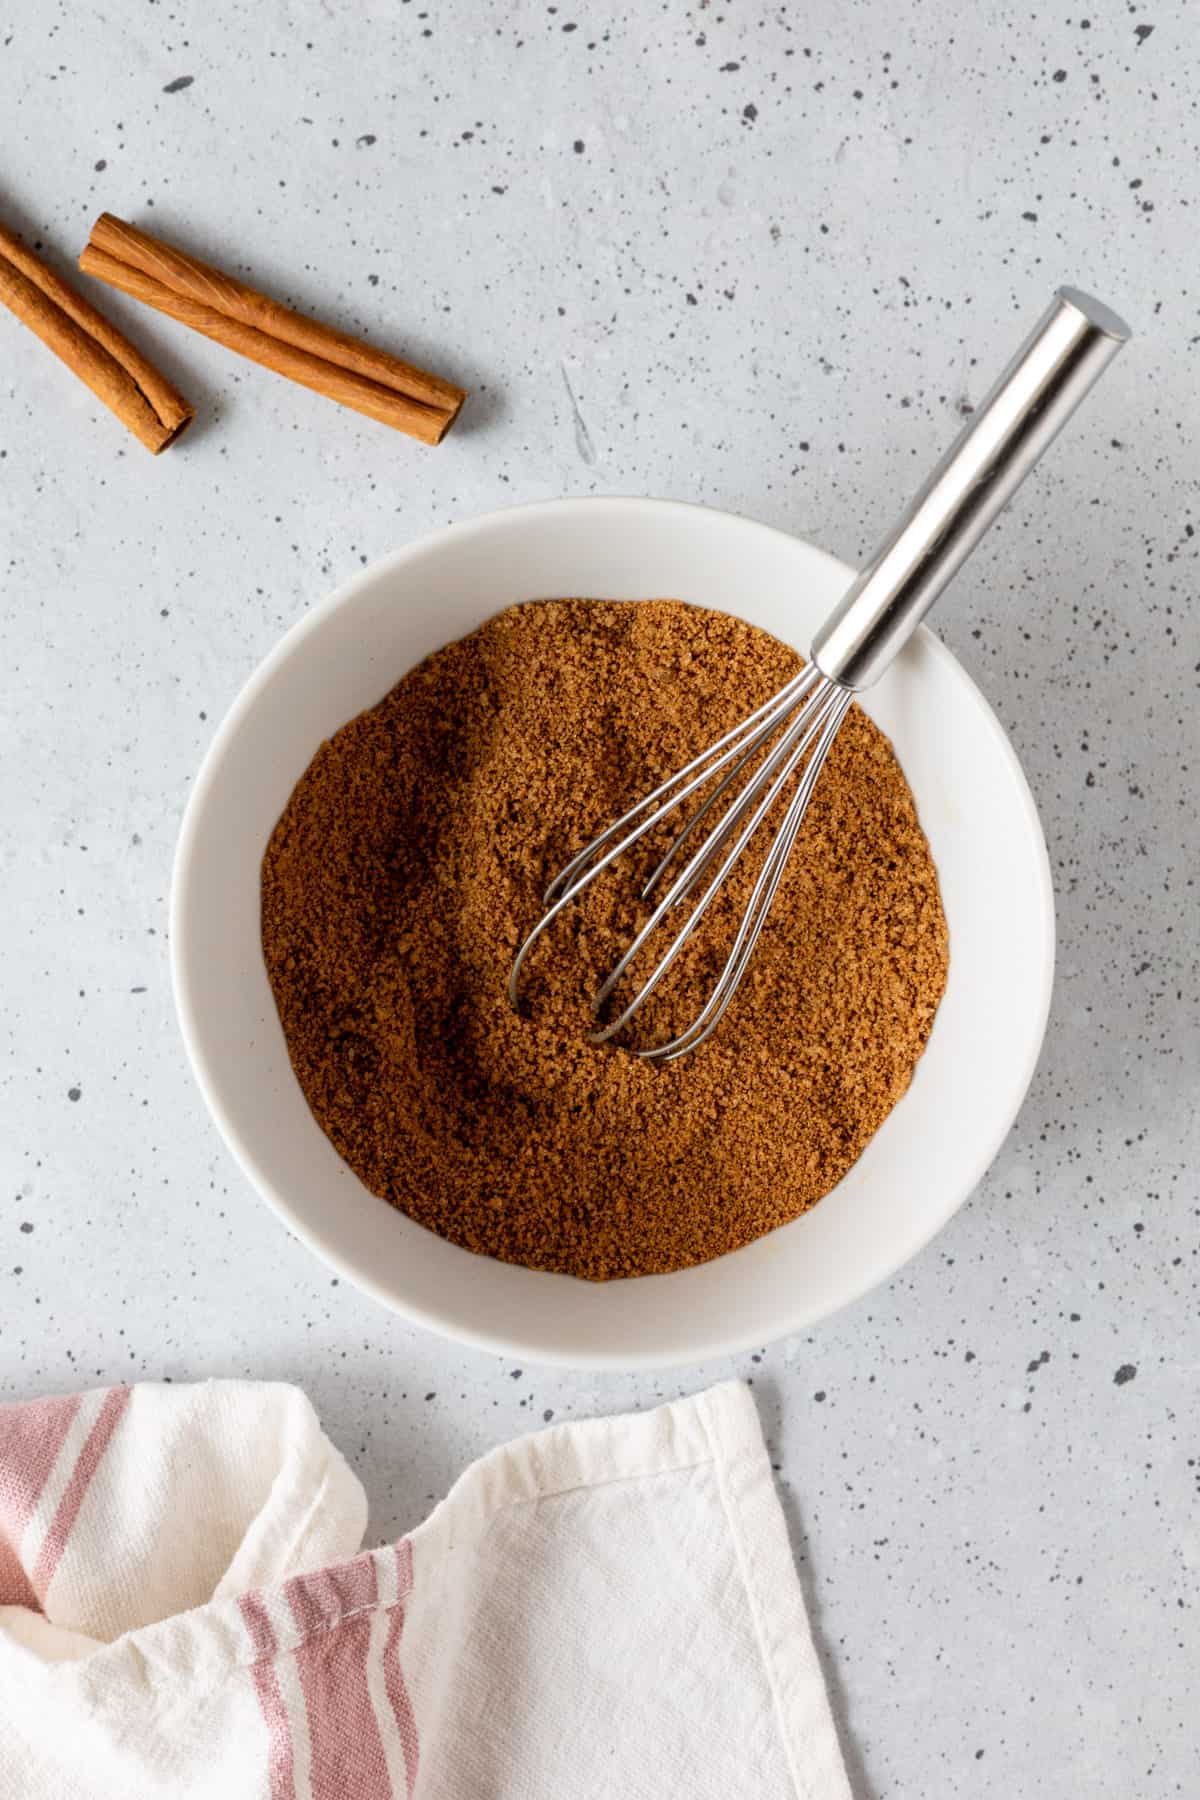 A bowl of cinnamon sugar with a small whisk.